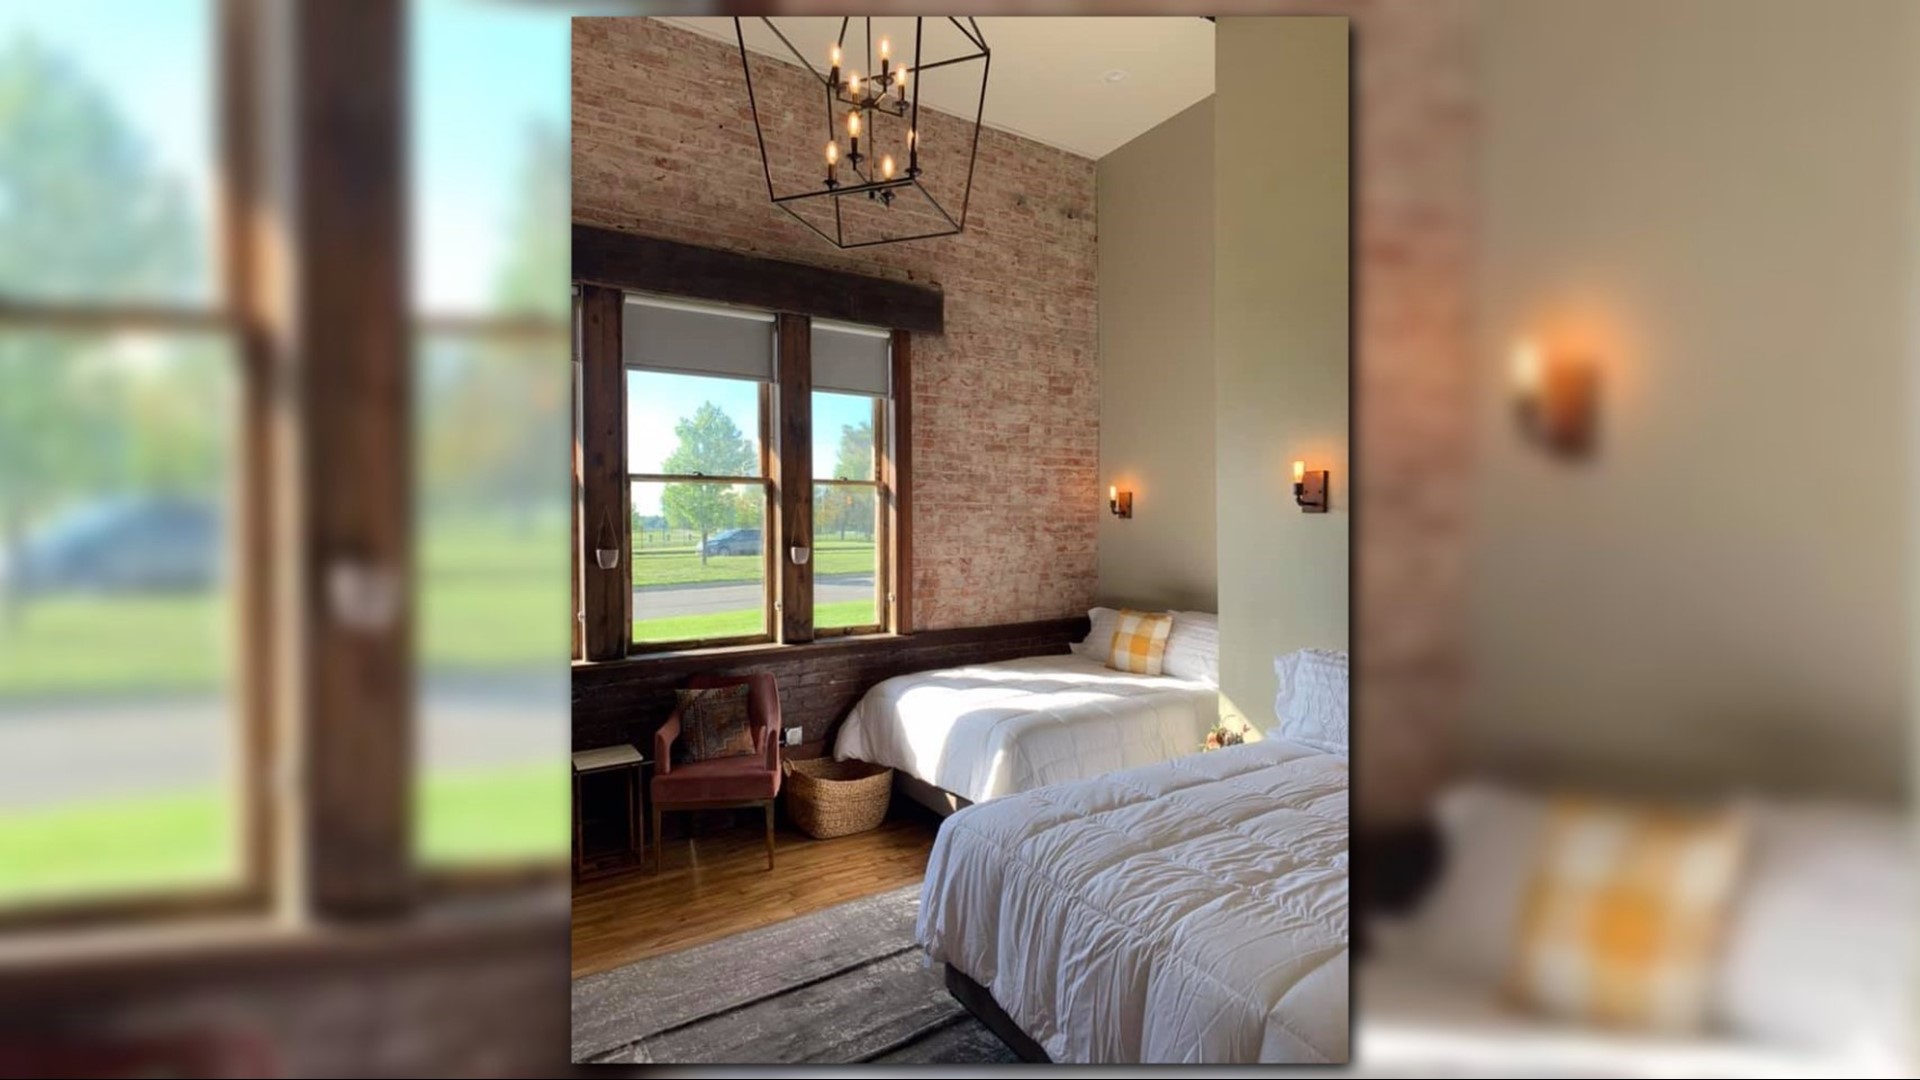 The Grand Trunk Train Depot in Muskegon has been renovated into a new, boutique hotel called the Depot. There will be a grand ceremony and ribbon cutting Wednesday, July 10.